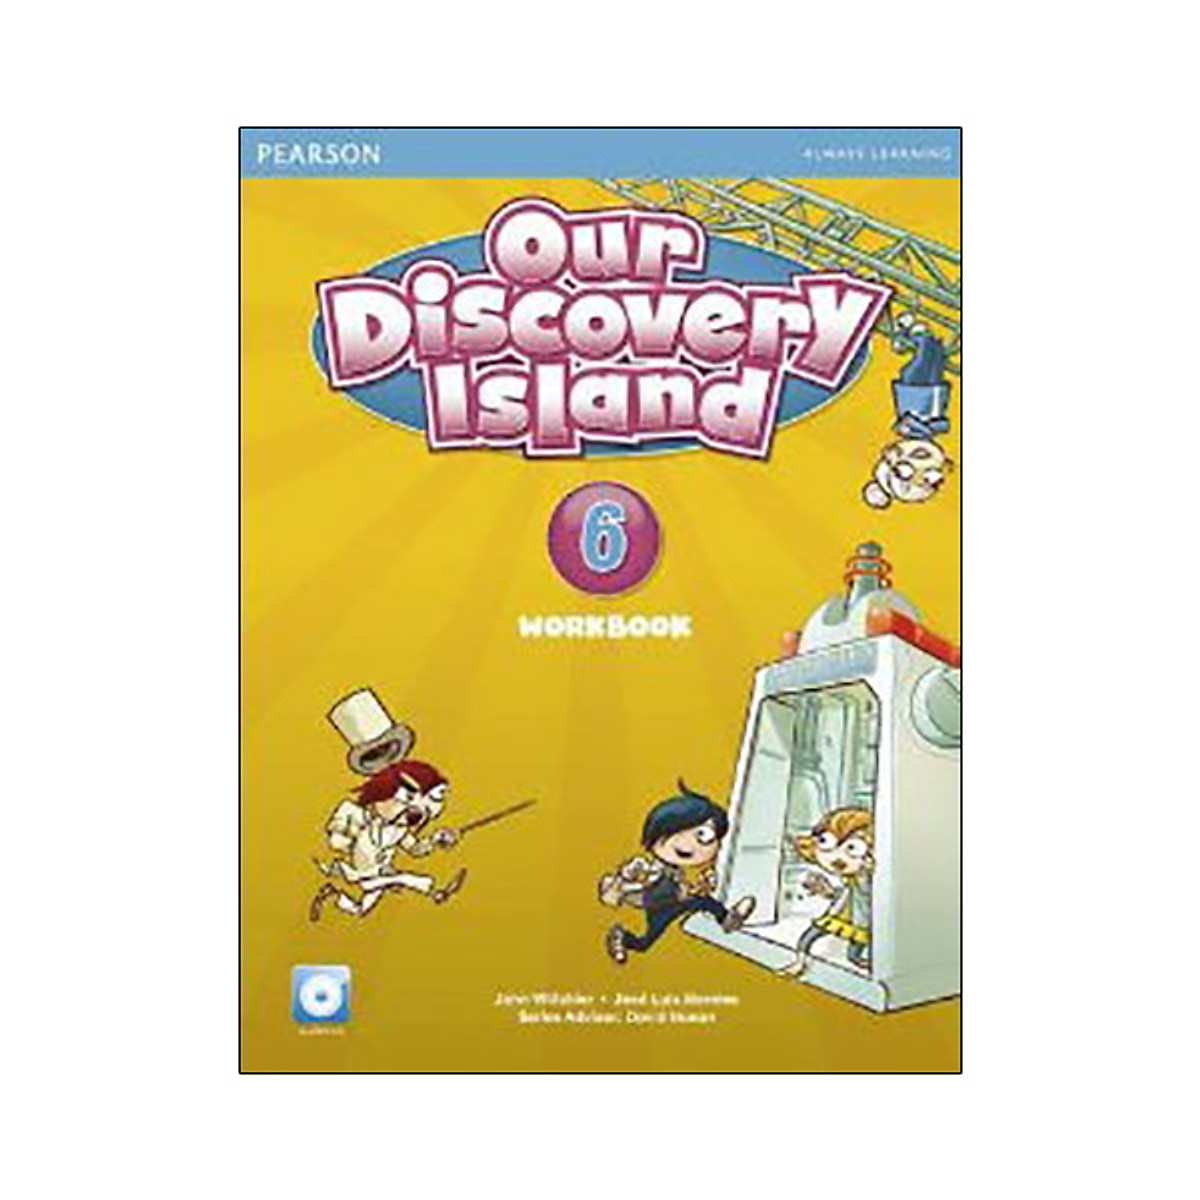 Our Discovery Island American Wb6 W/Cd